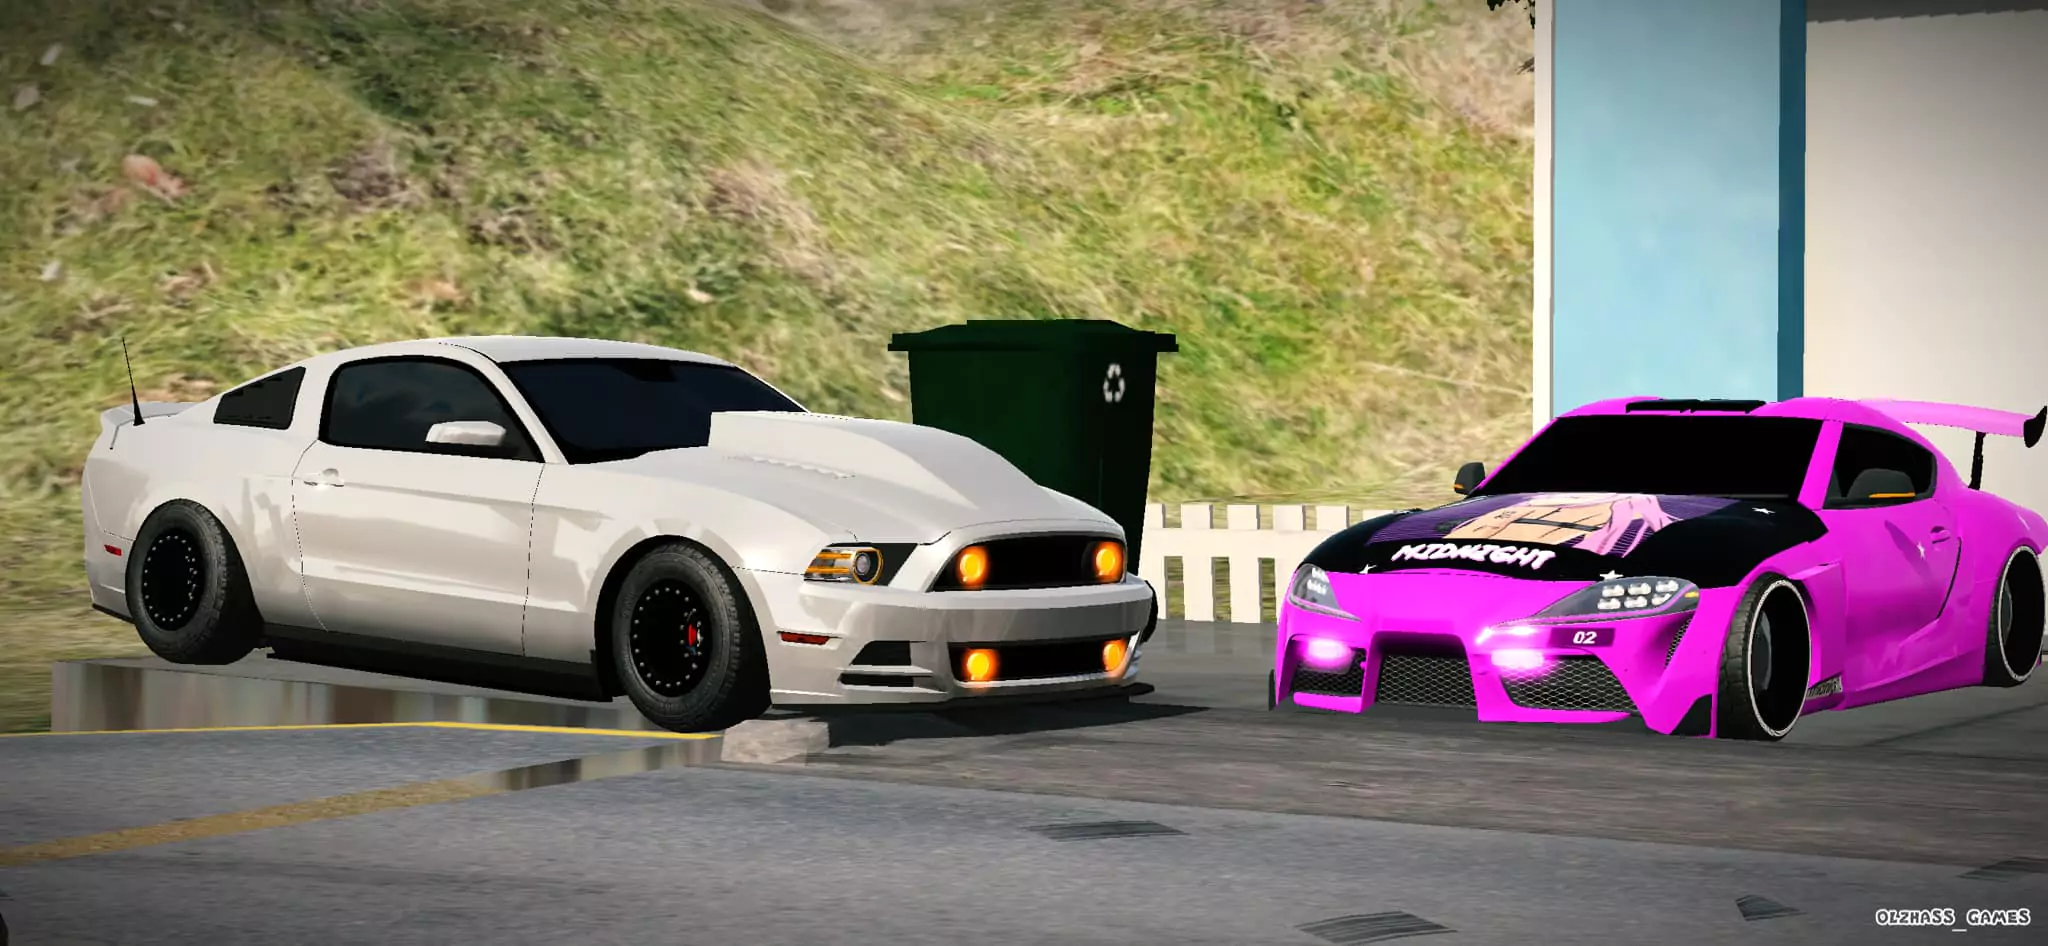 Two cars white and pink parked on the road in car parking multiplayer mod APK old versions